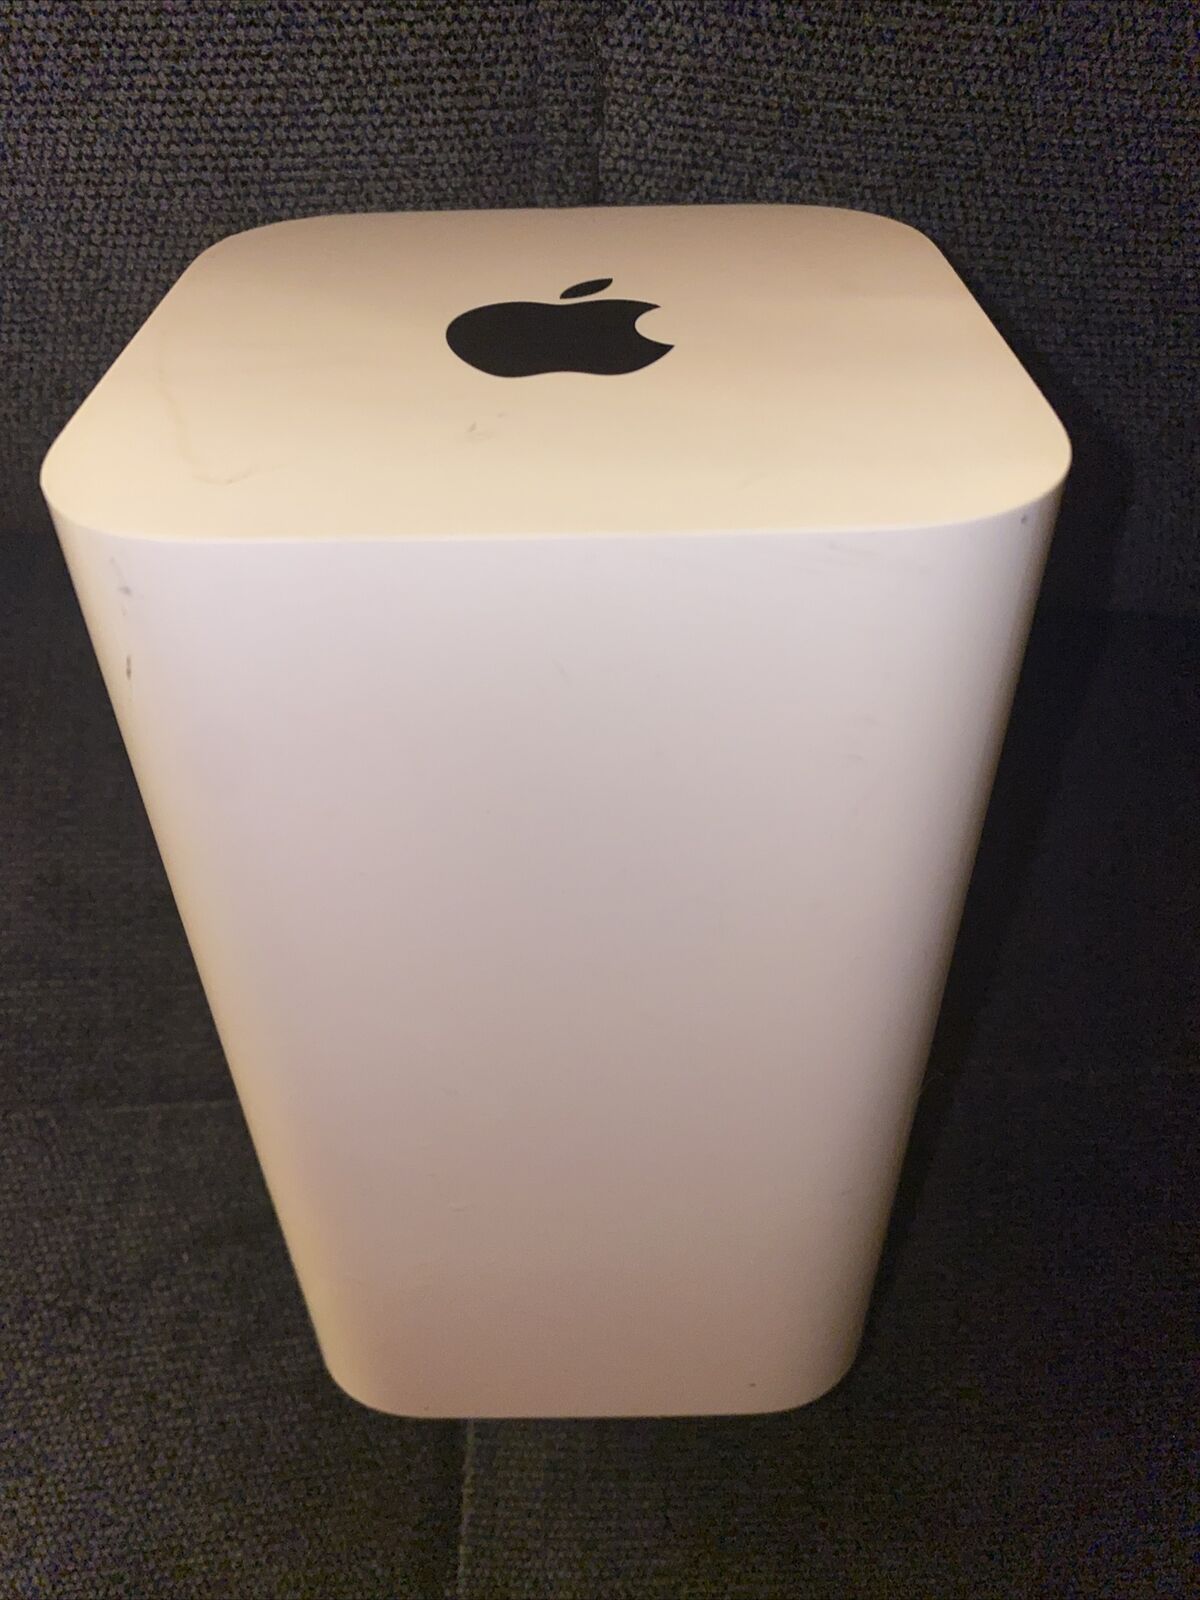 Apple A1521 AirPort Extreme Base Station Wireless Router Untested